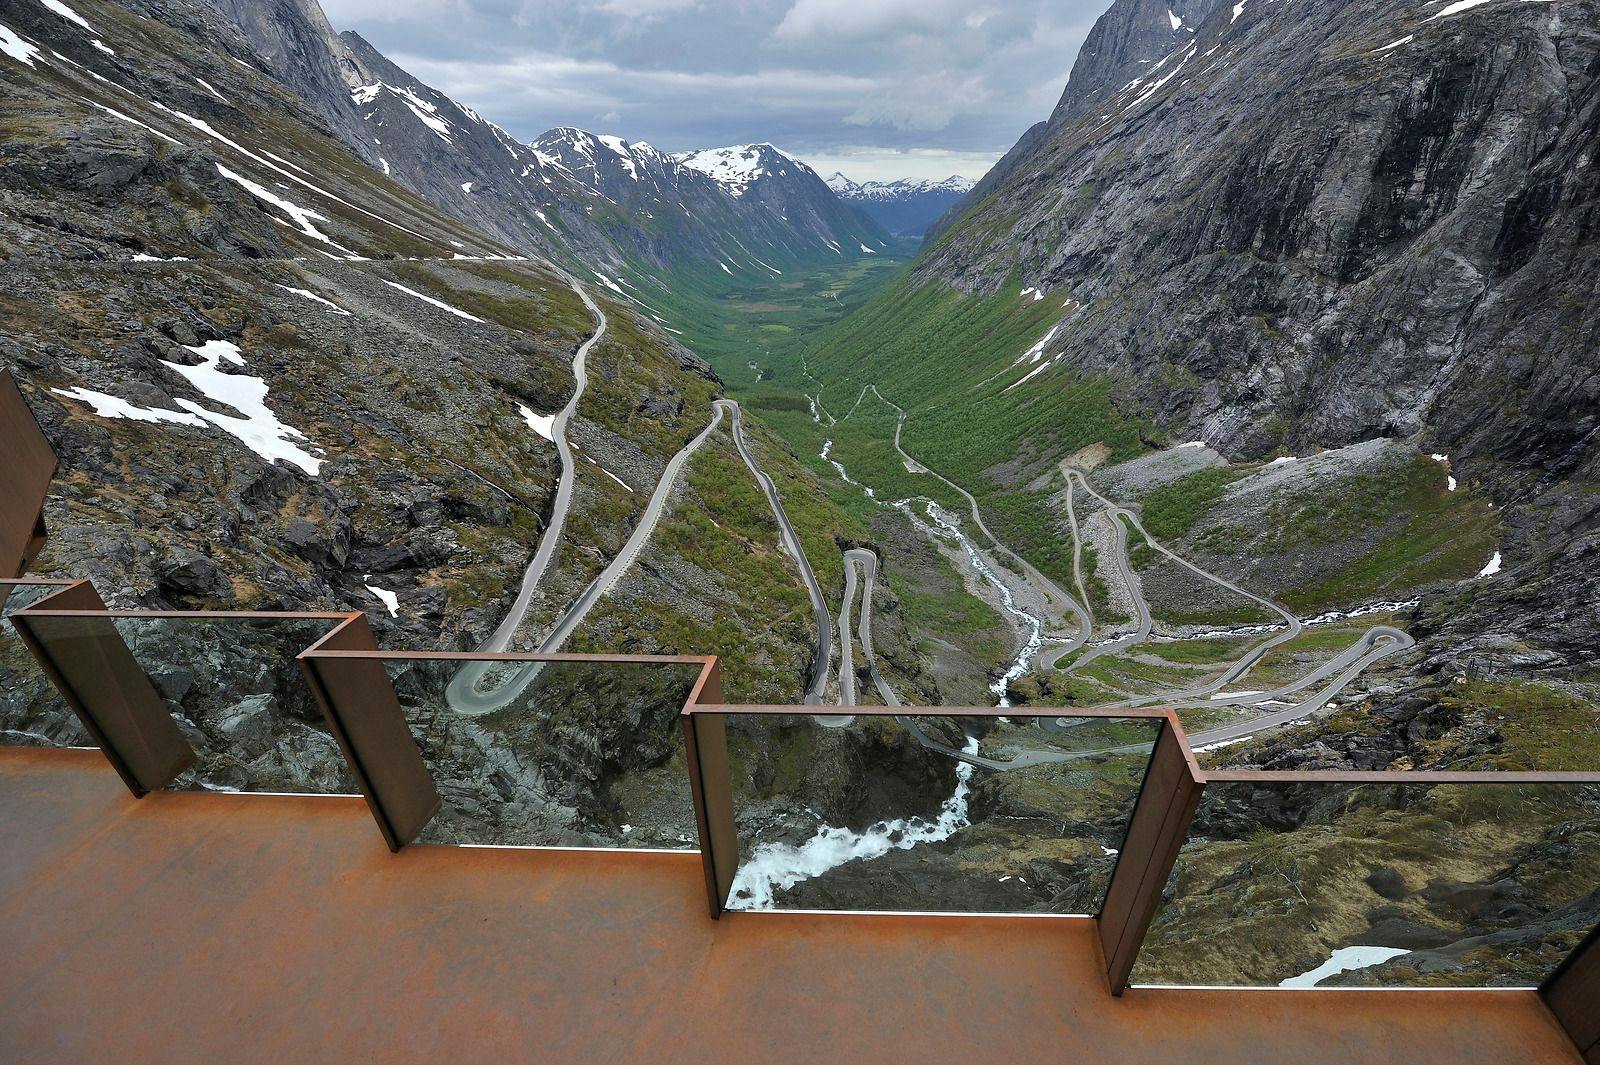 driving the hairpin bend in norway